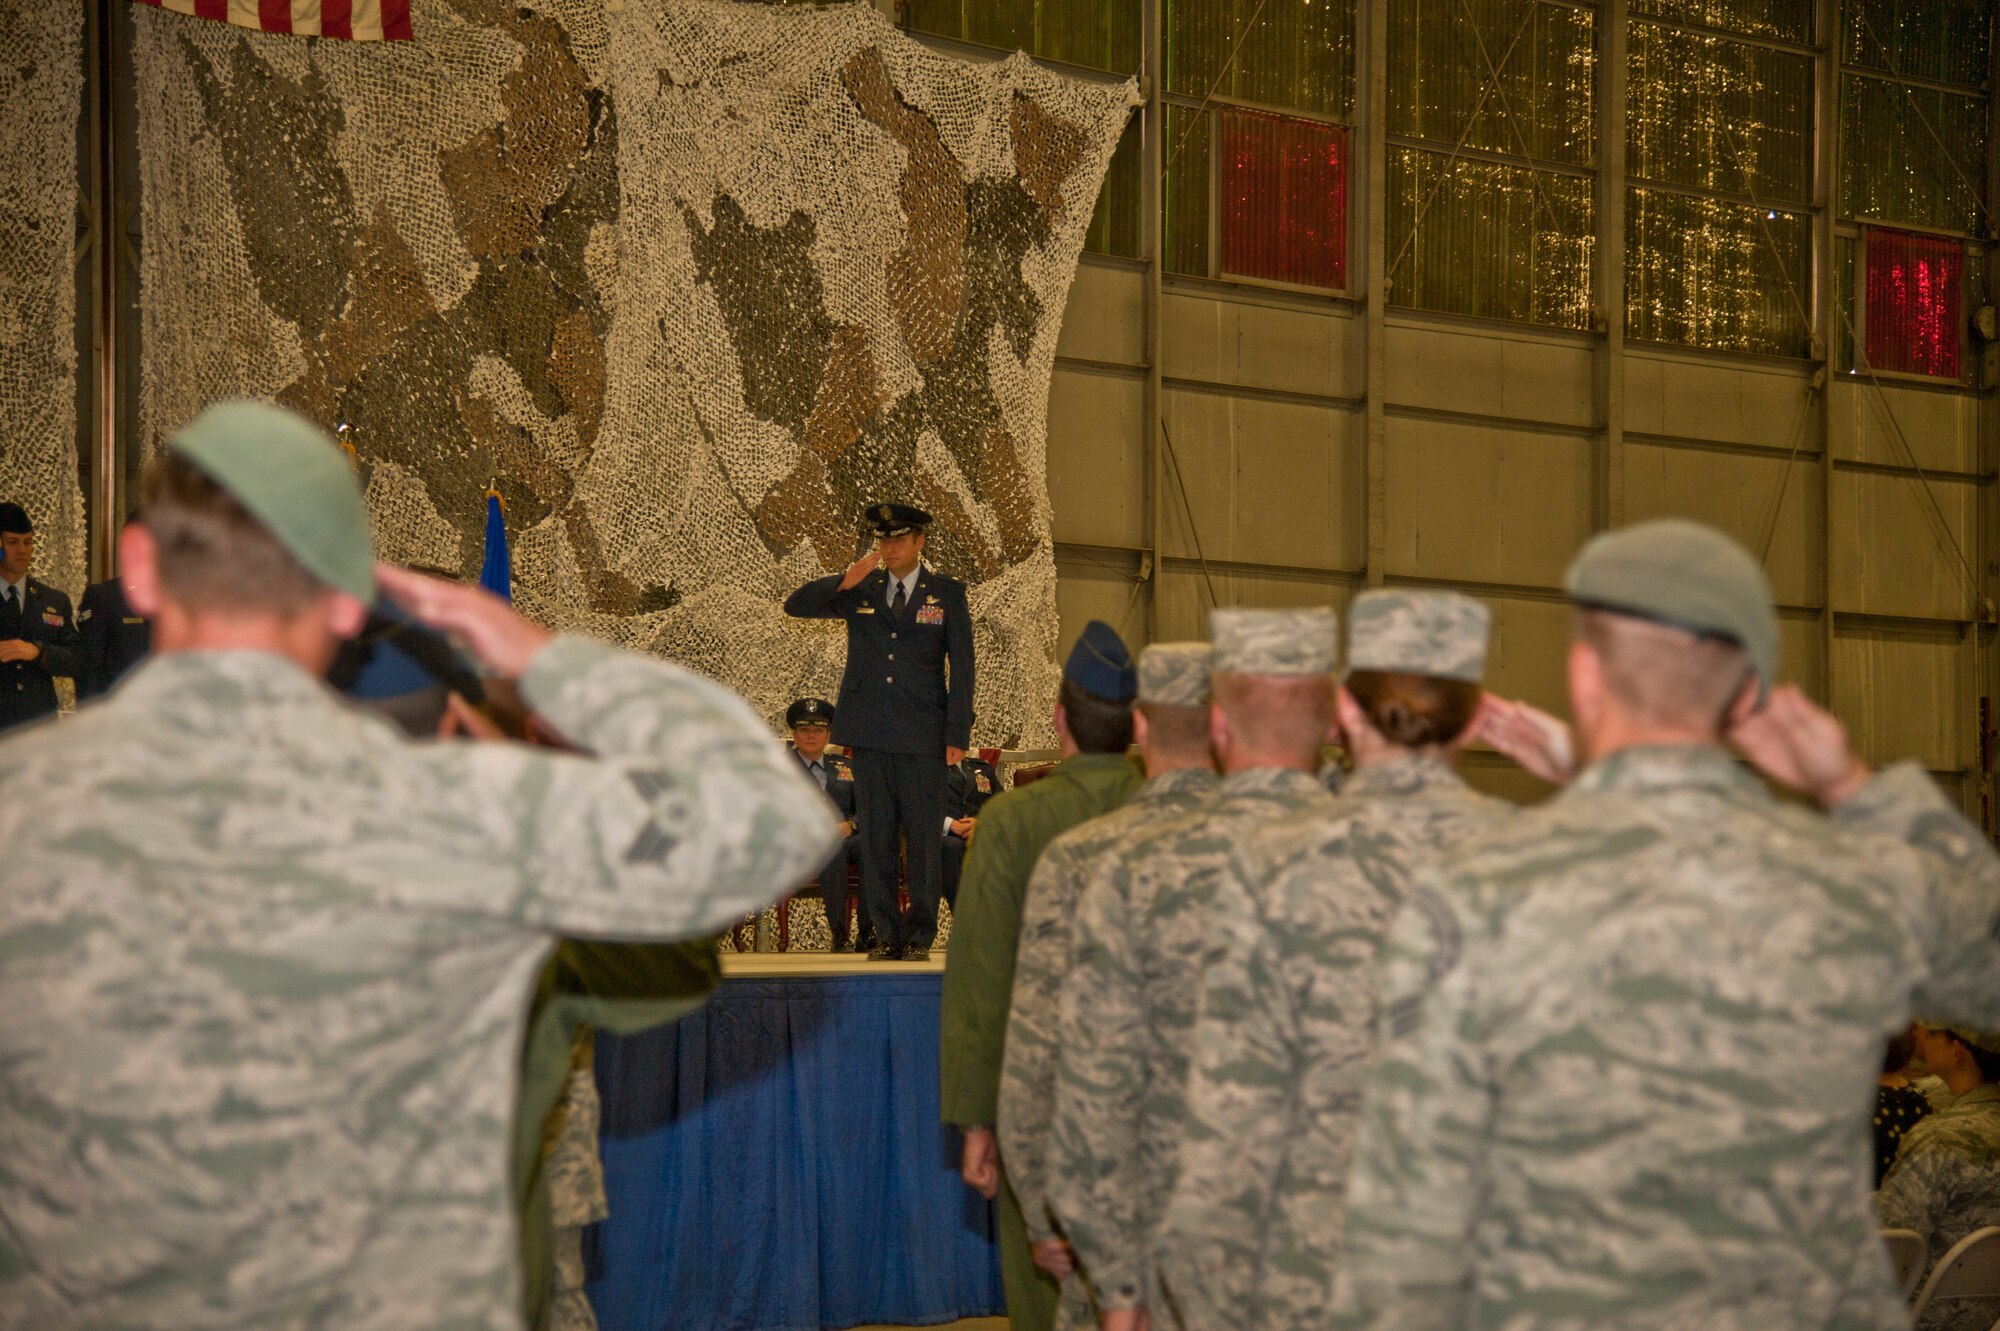 Lt. Col. Jason Snyder, 36th Rescue Squadron commander, receives his first salute from his squadron Aug. 14, 2015, at Fairchild Air Force Base, Wash. Snyder was the commander for the 36th Rescue Flight prior to the unit becoming a squadron. (U.S. Air Force photo/Airman 1st Class Taylor Bourgeous)